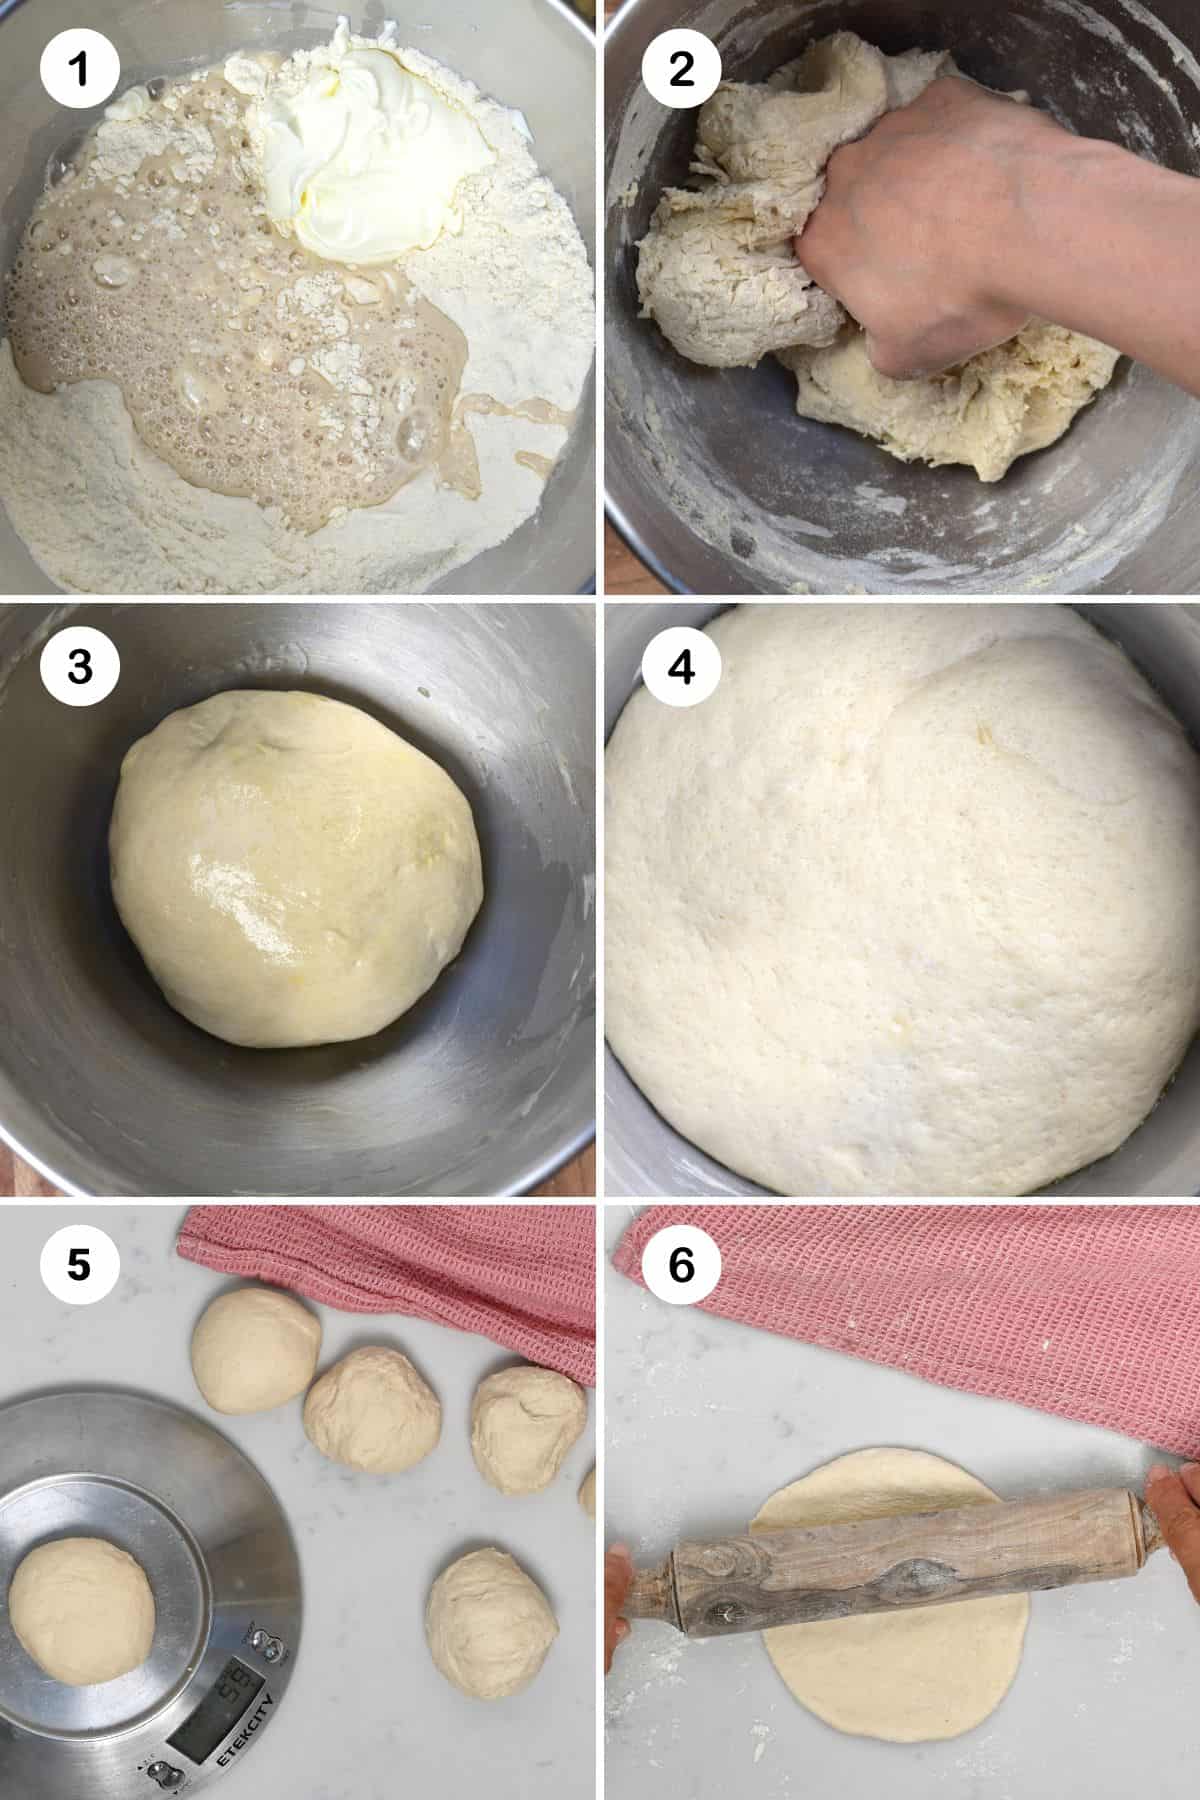 Steps for making a simple dough